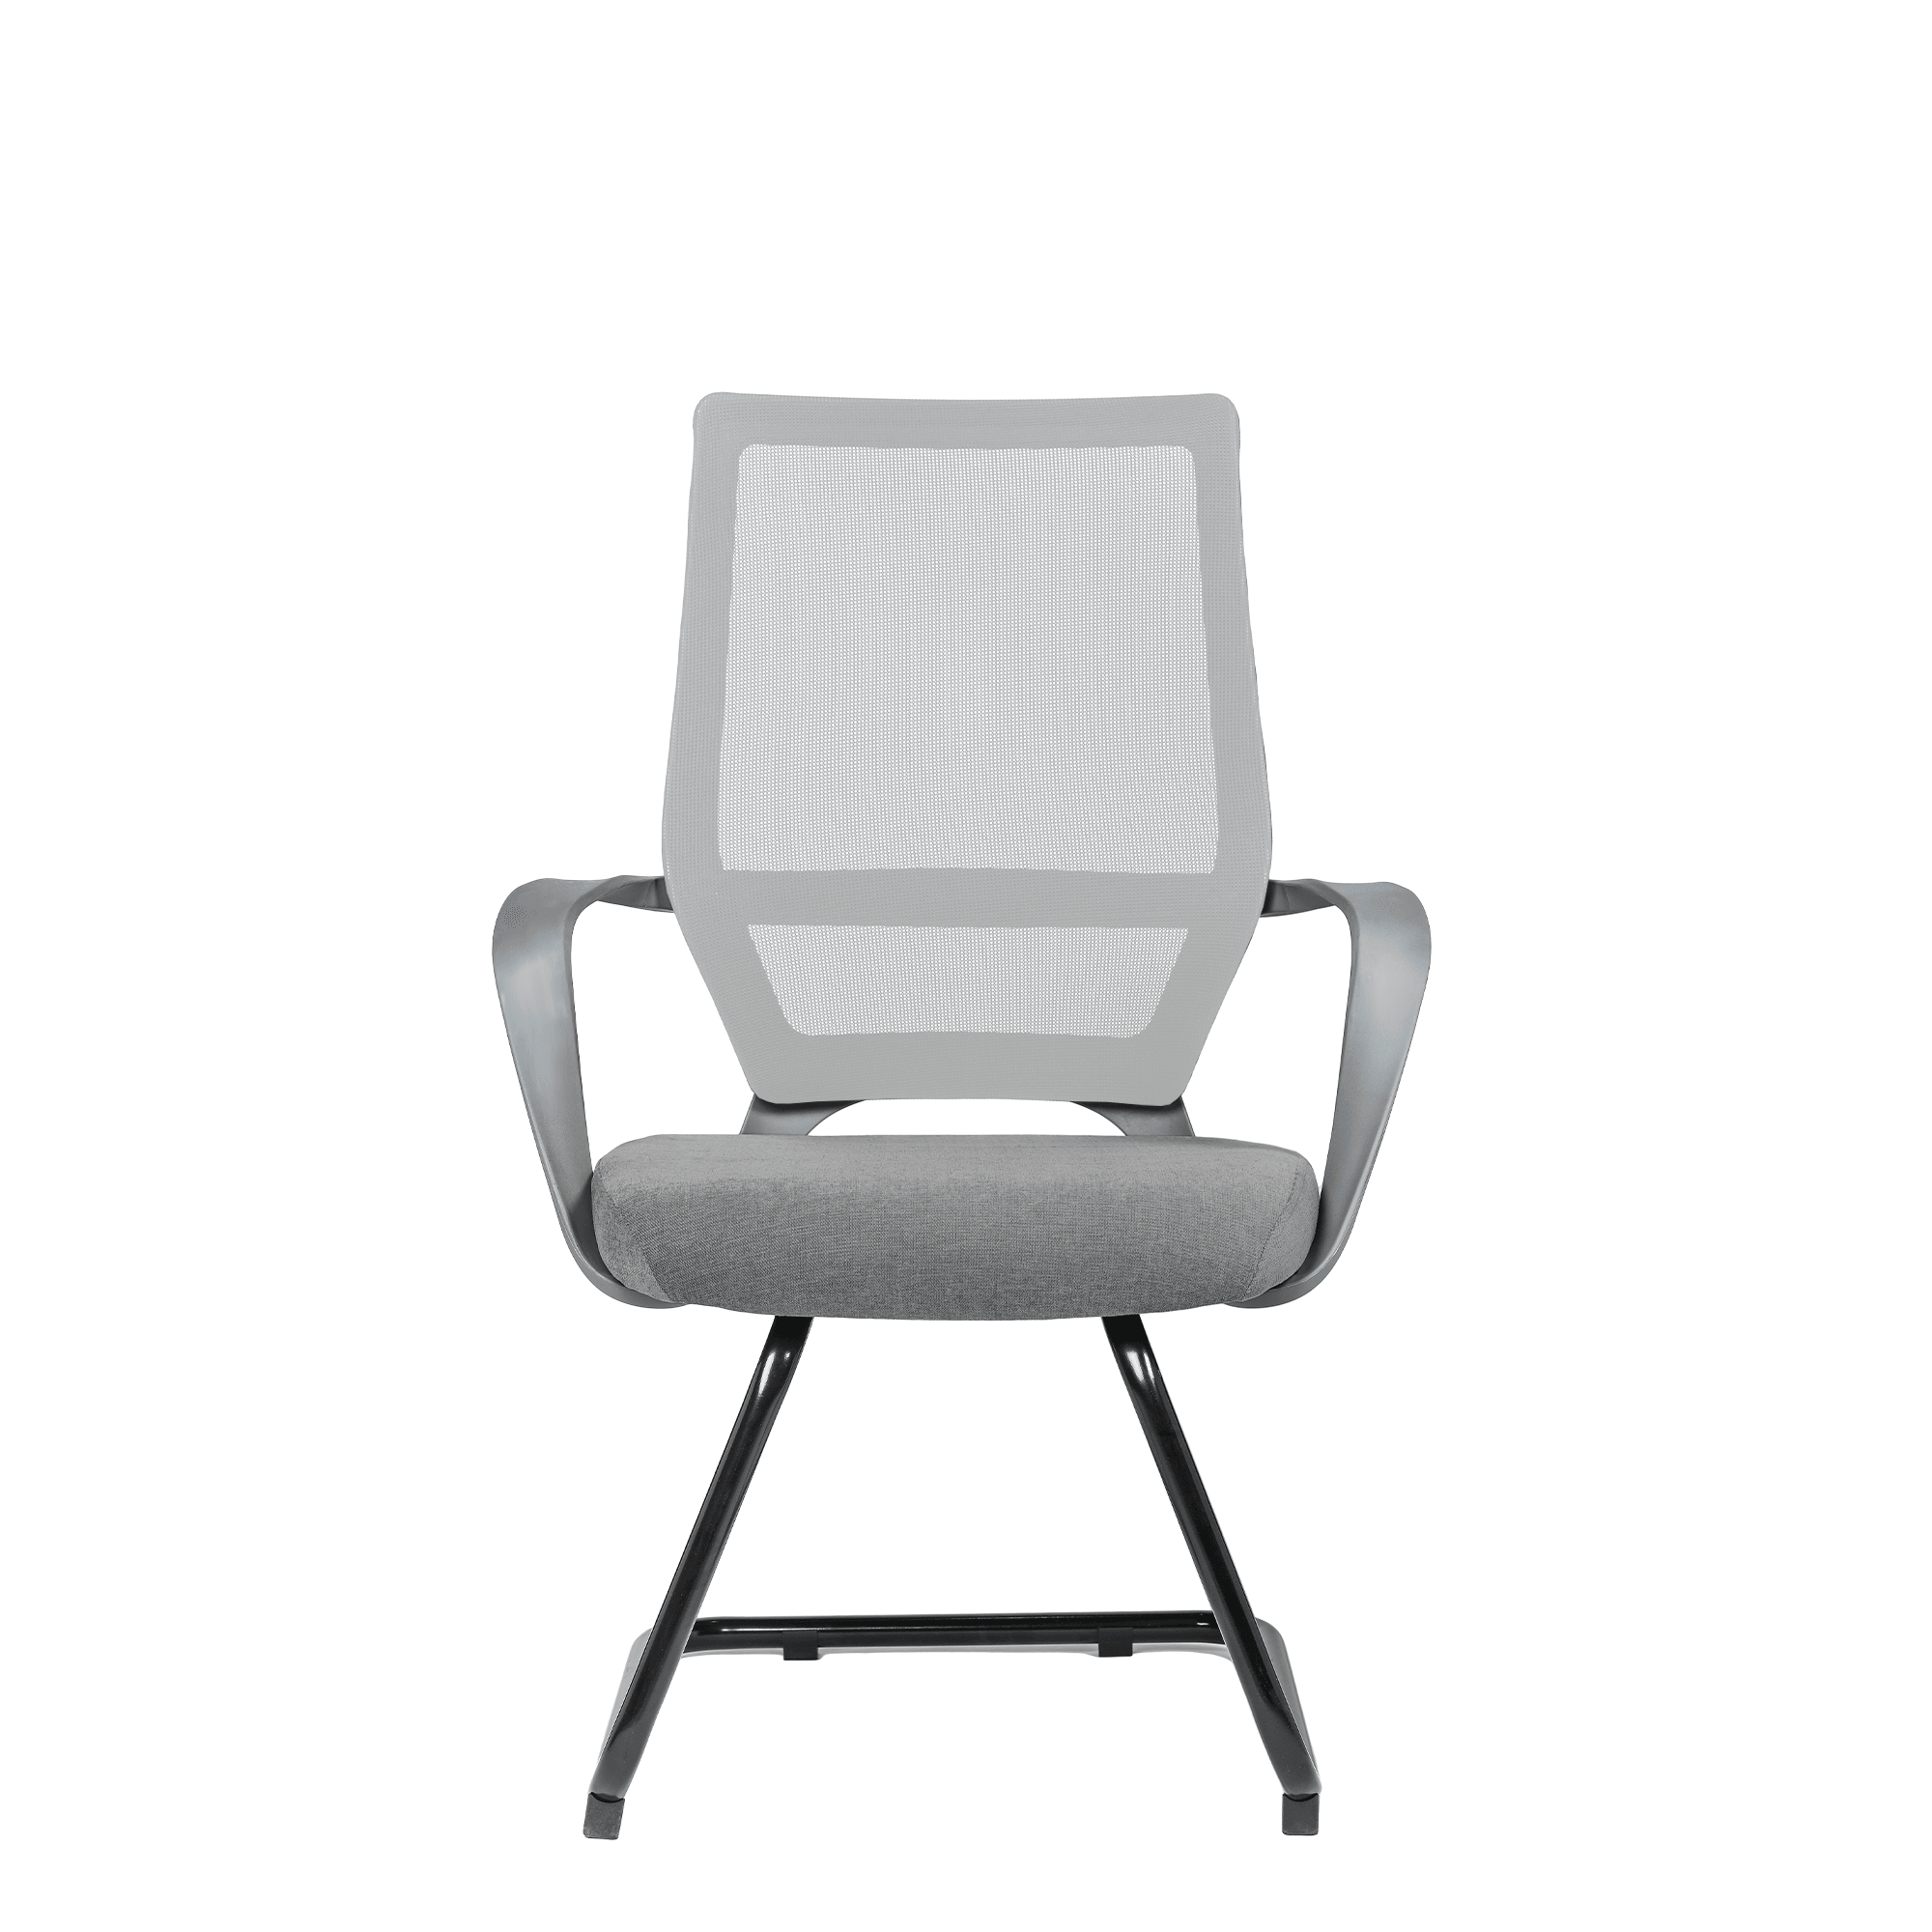 ZAK Medium Back Visitor (Grey Chair) - Exclusiff Seating Sytems